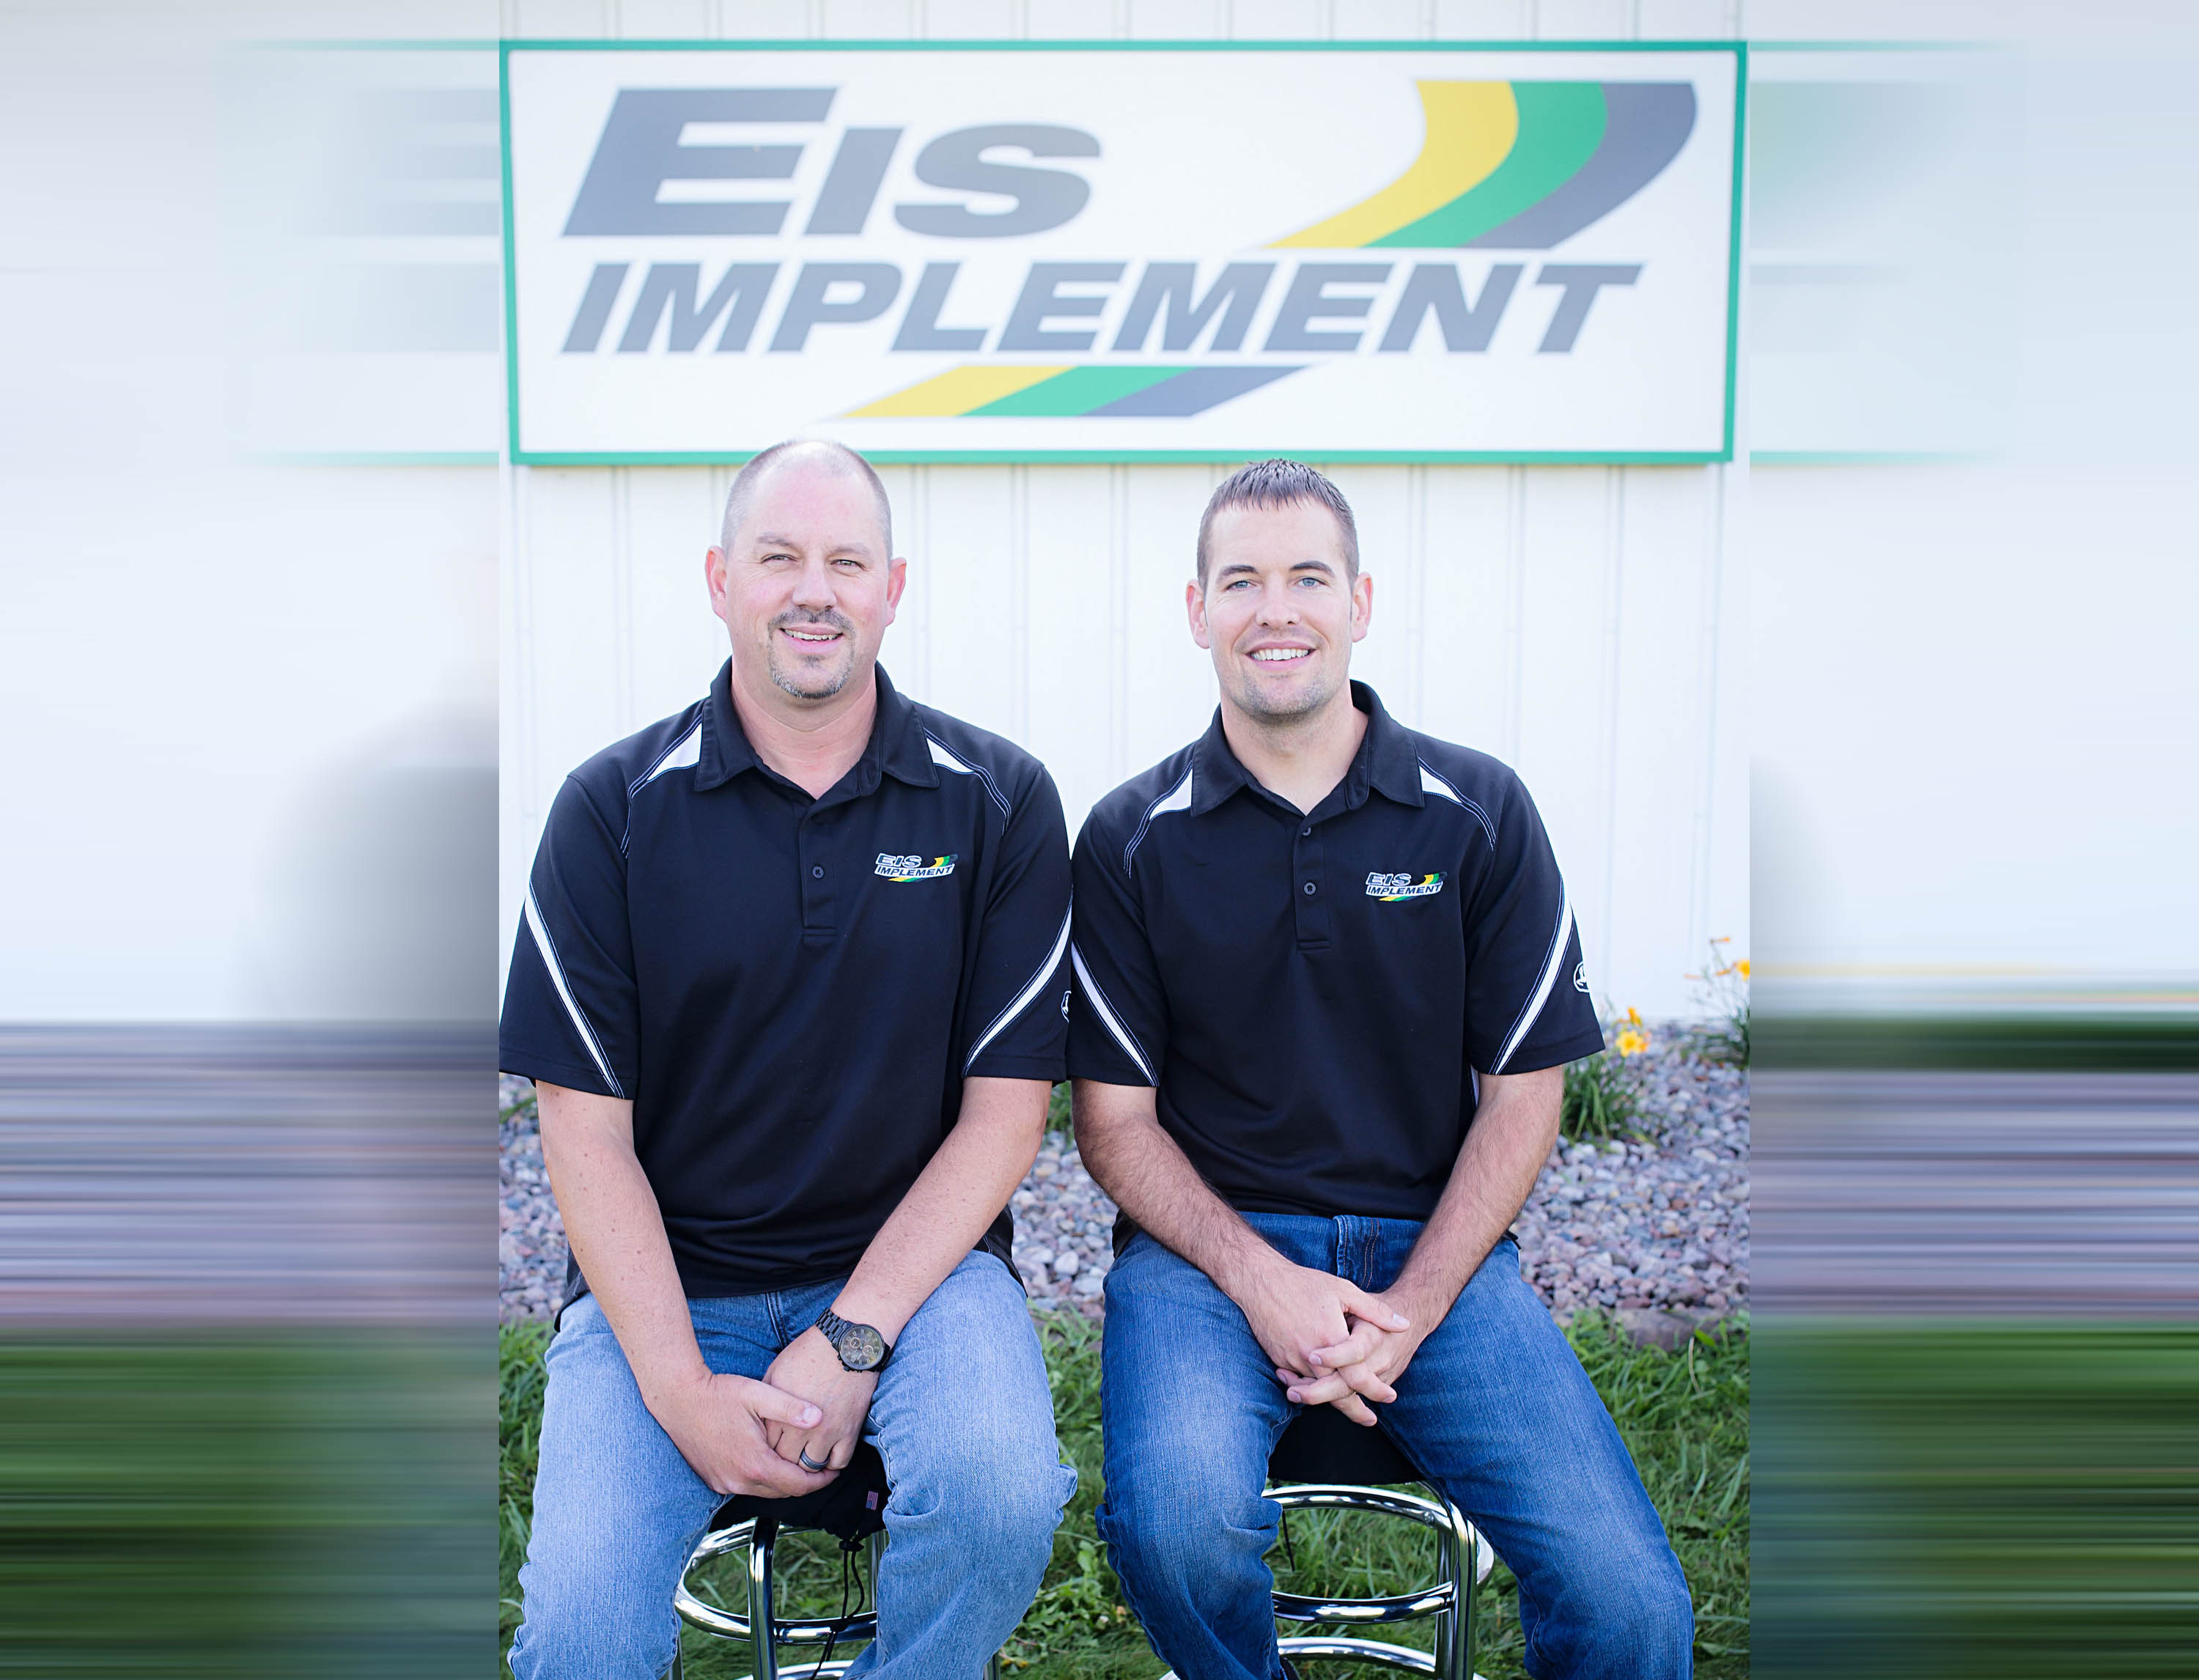 eis implement